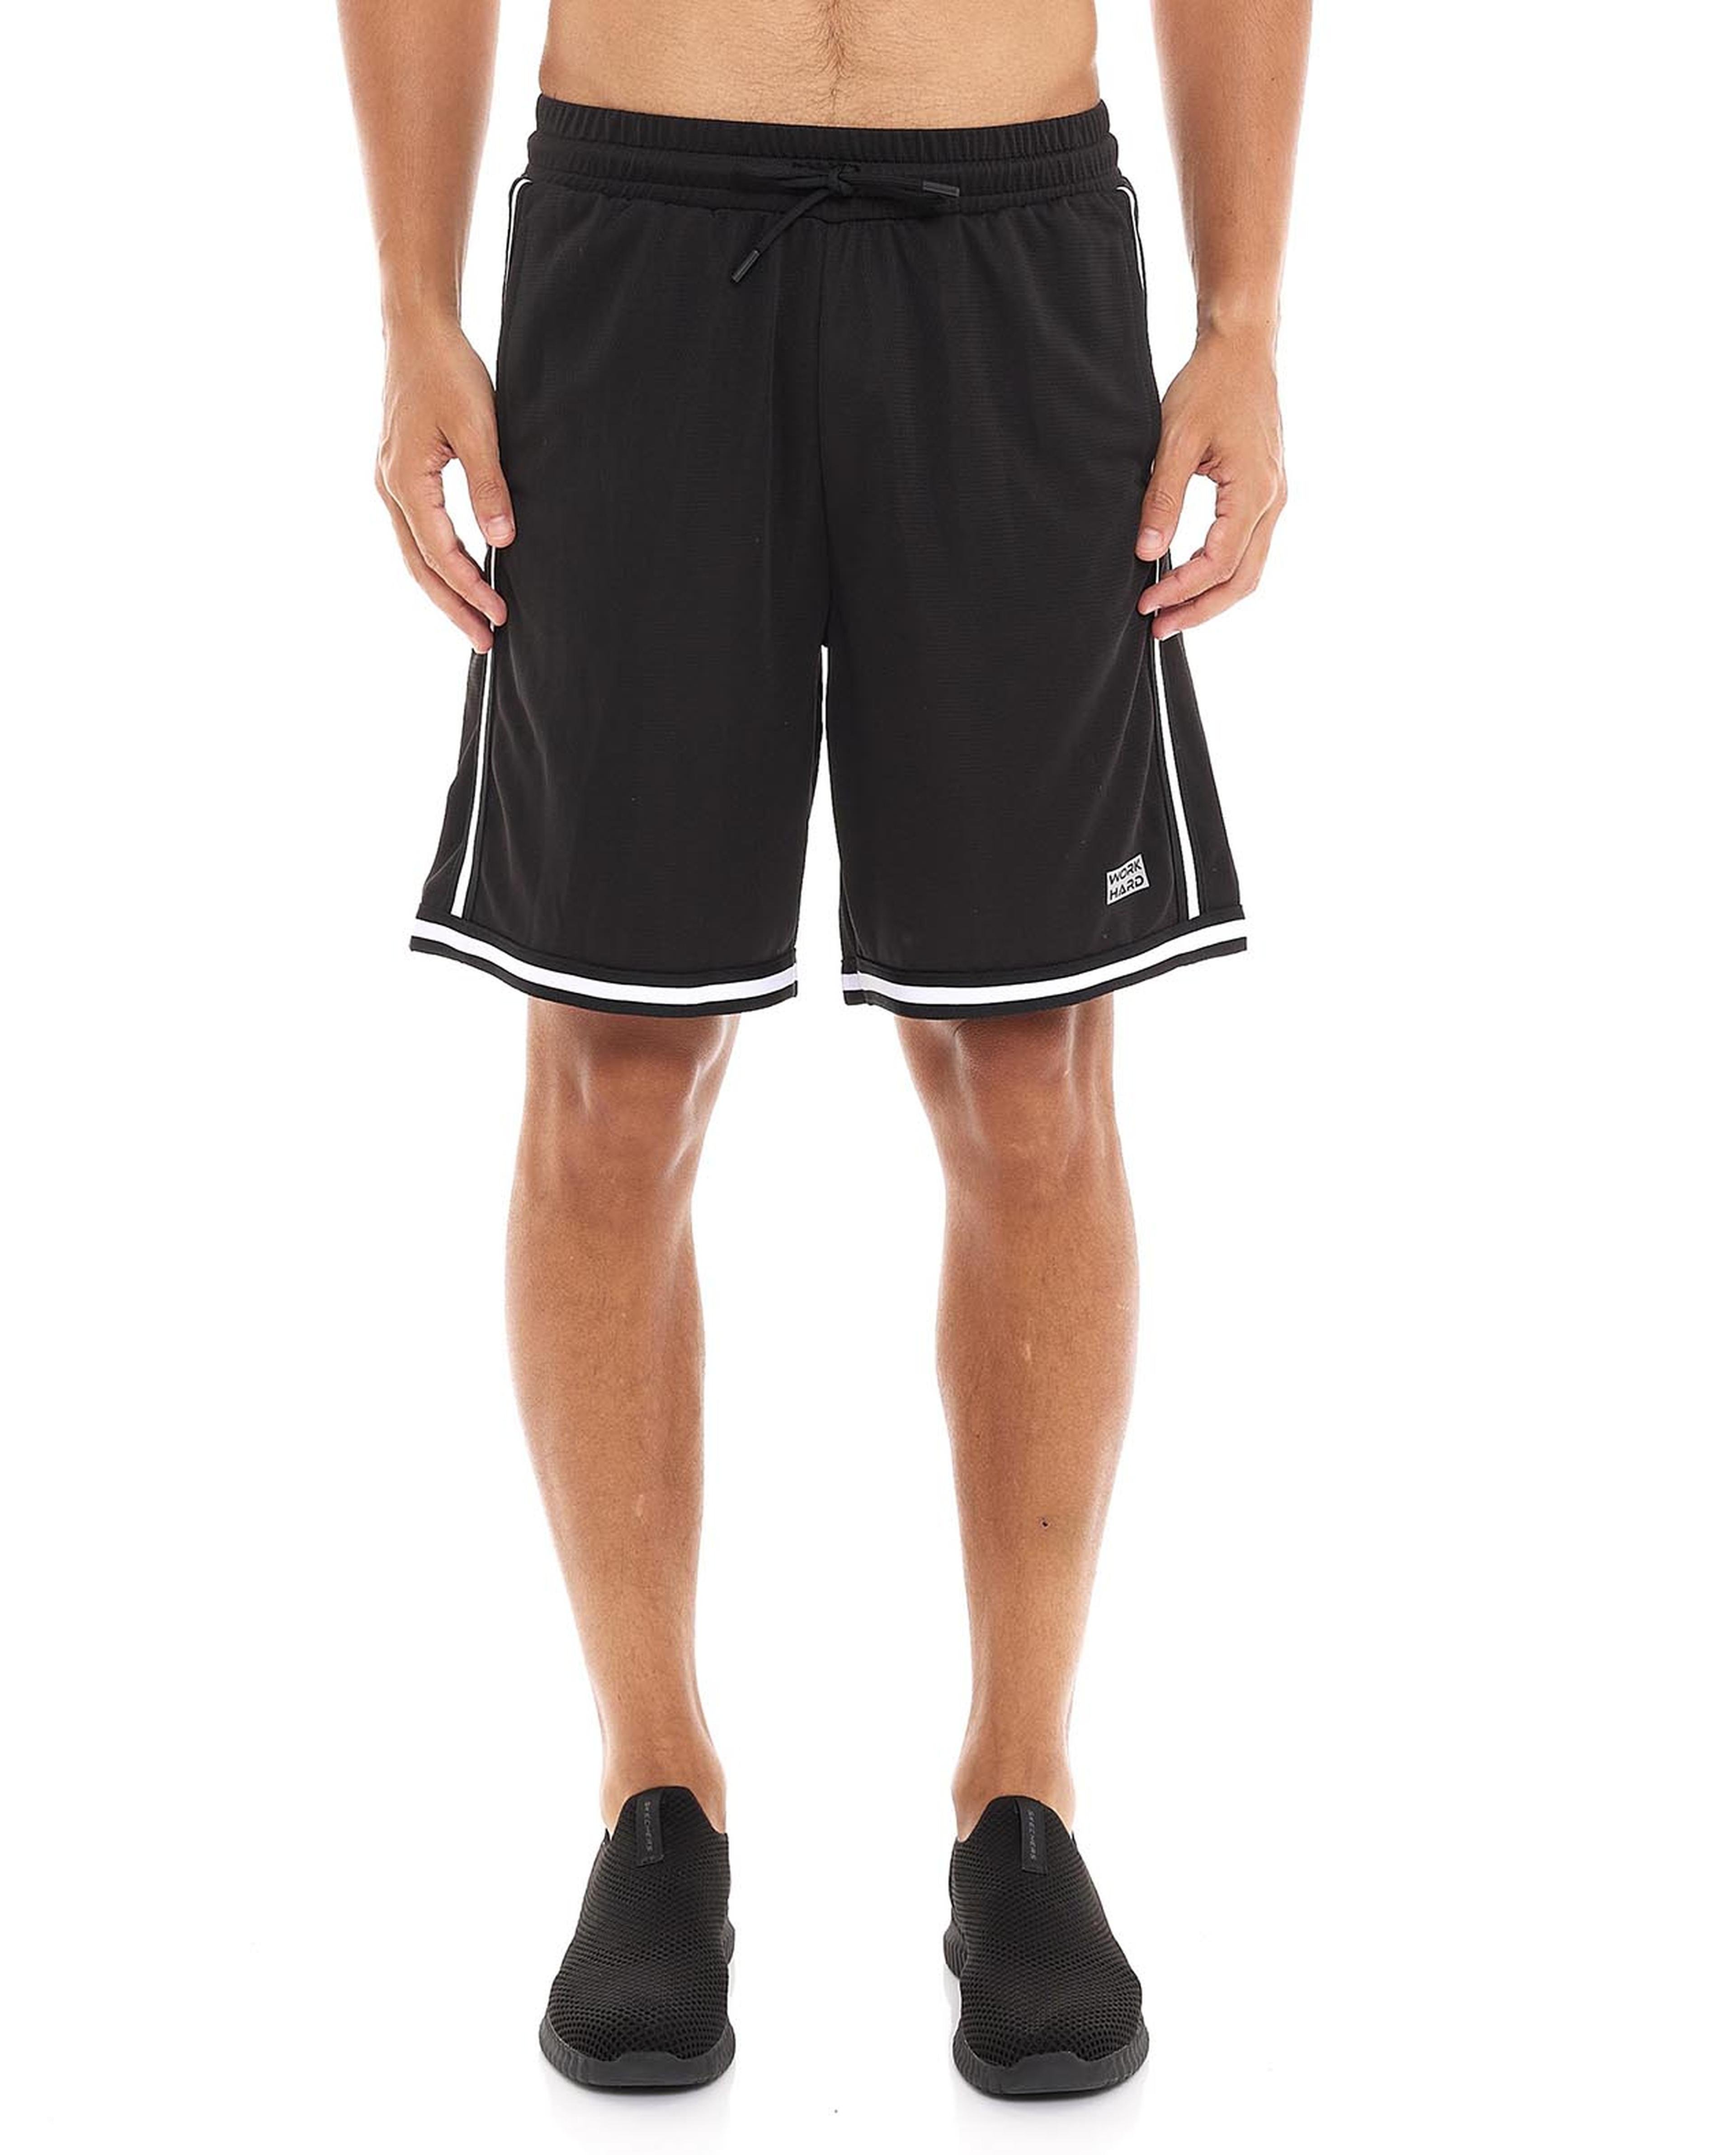 Contrast Trim Active Shorts with Drawstring Waist